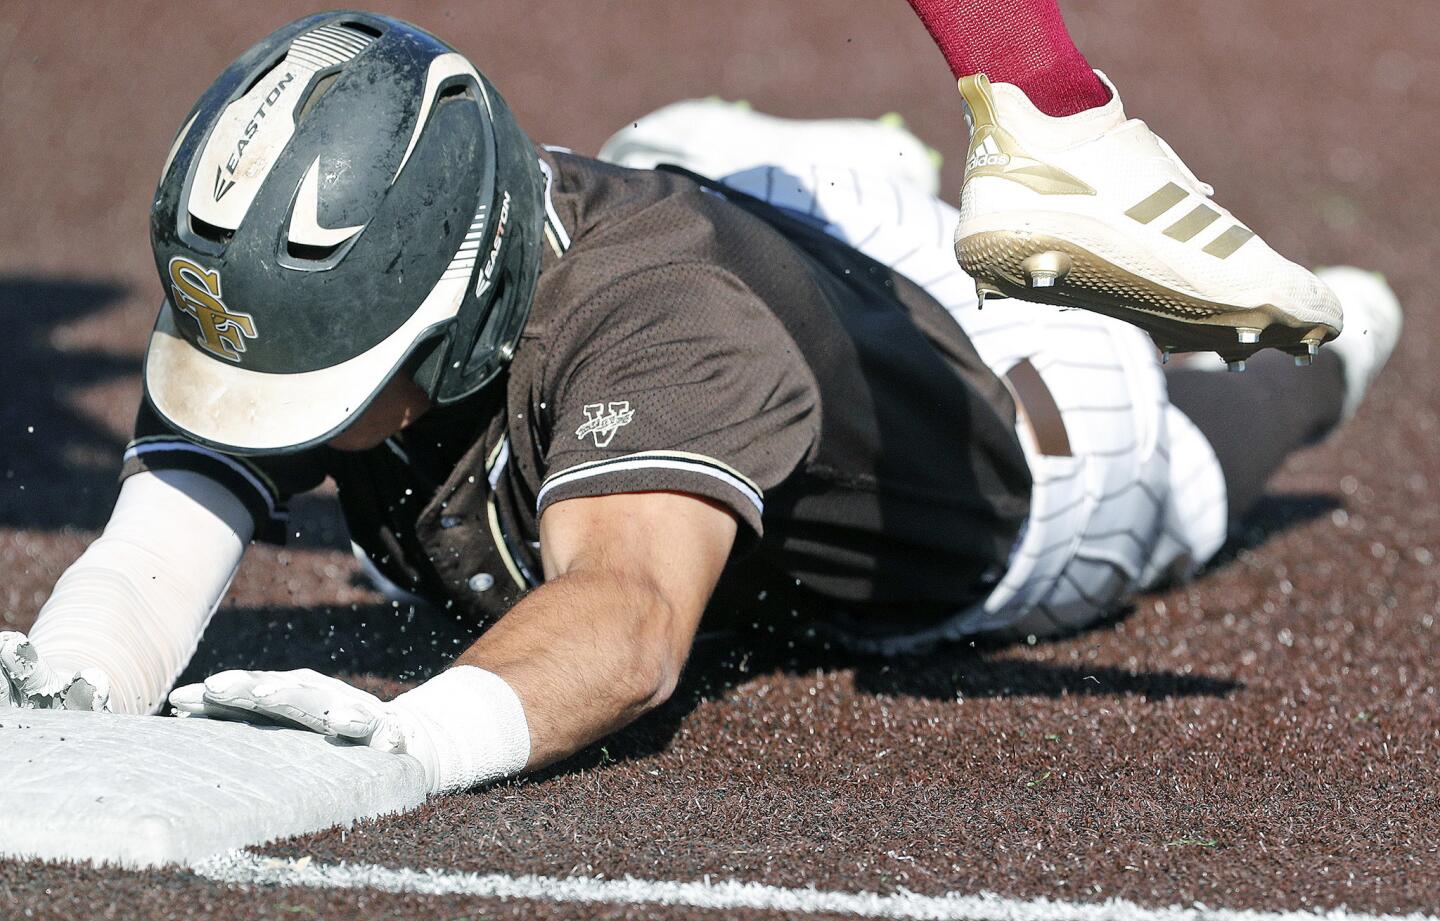 Photo Gallery: St. Francis vs. Alemany in Mission League baseball